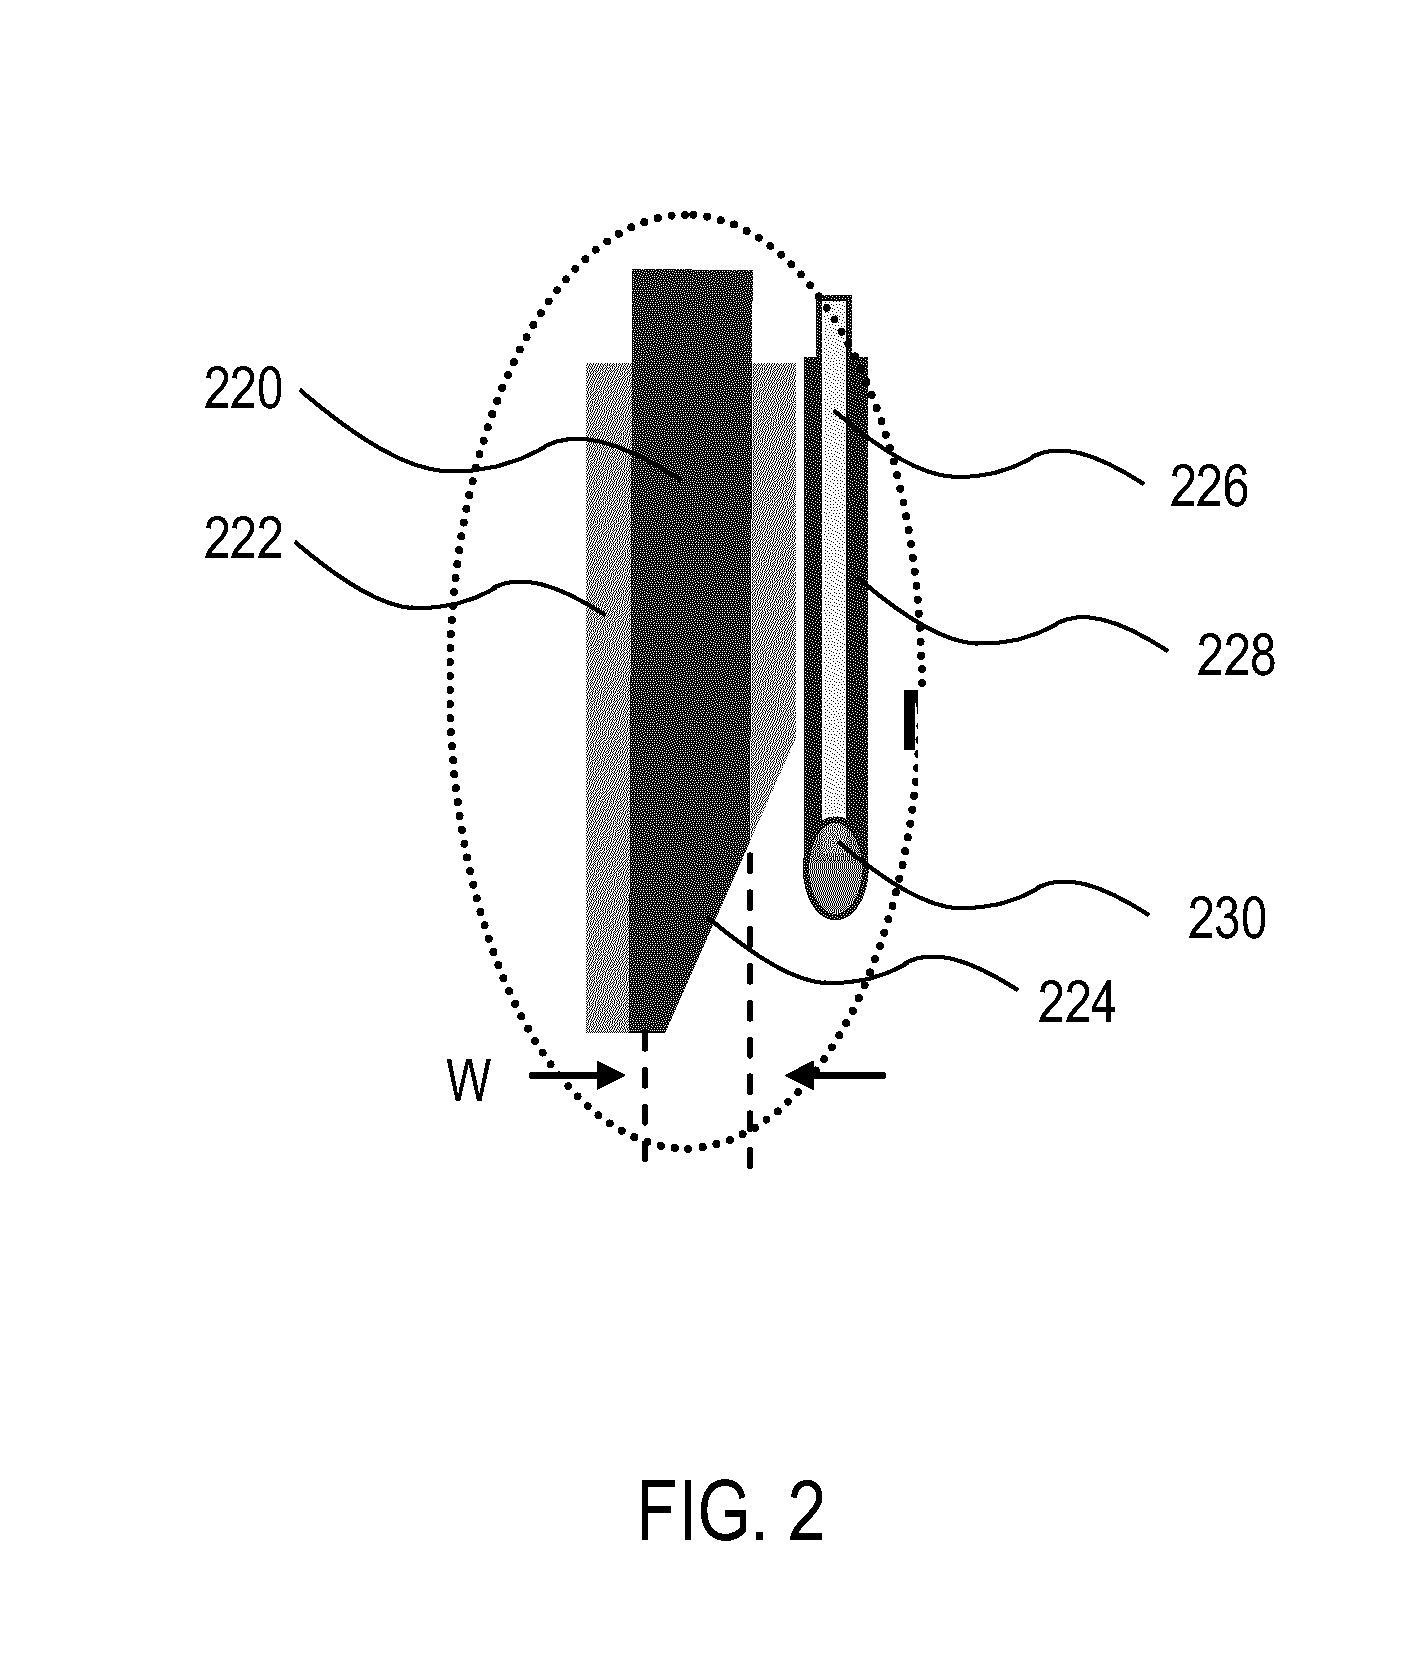 Systems and methods for selectively migrating cells using electric fields